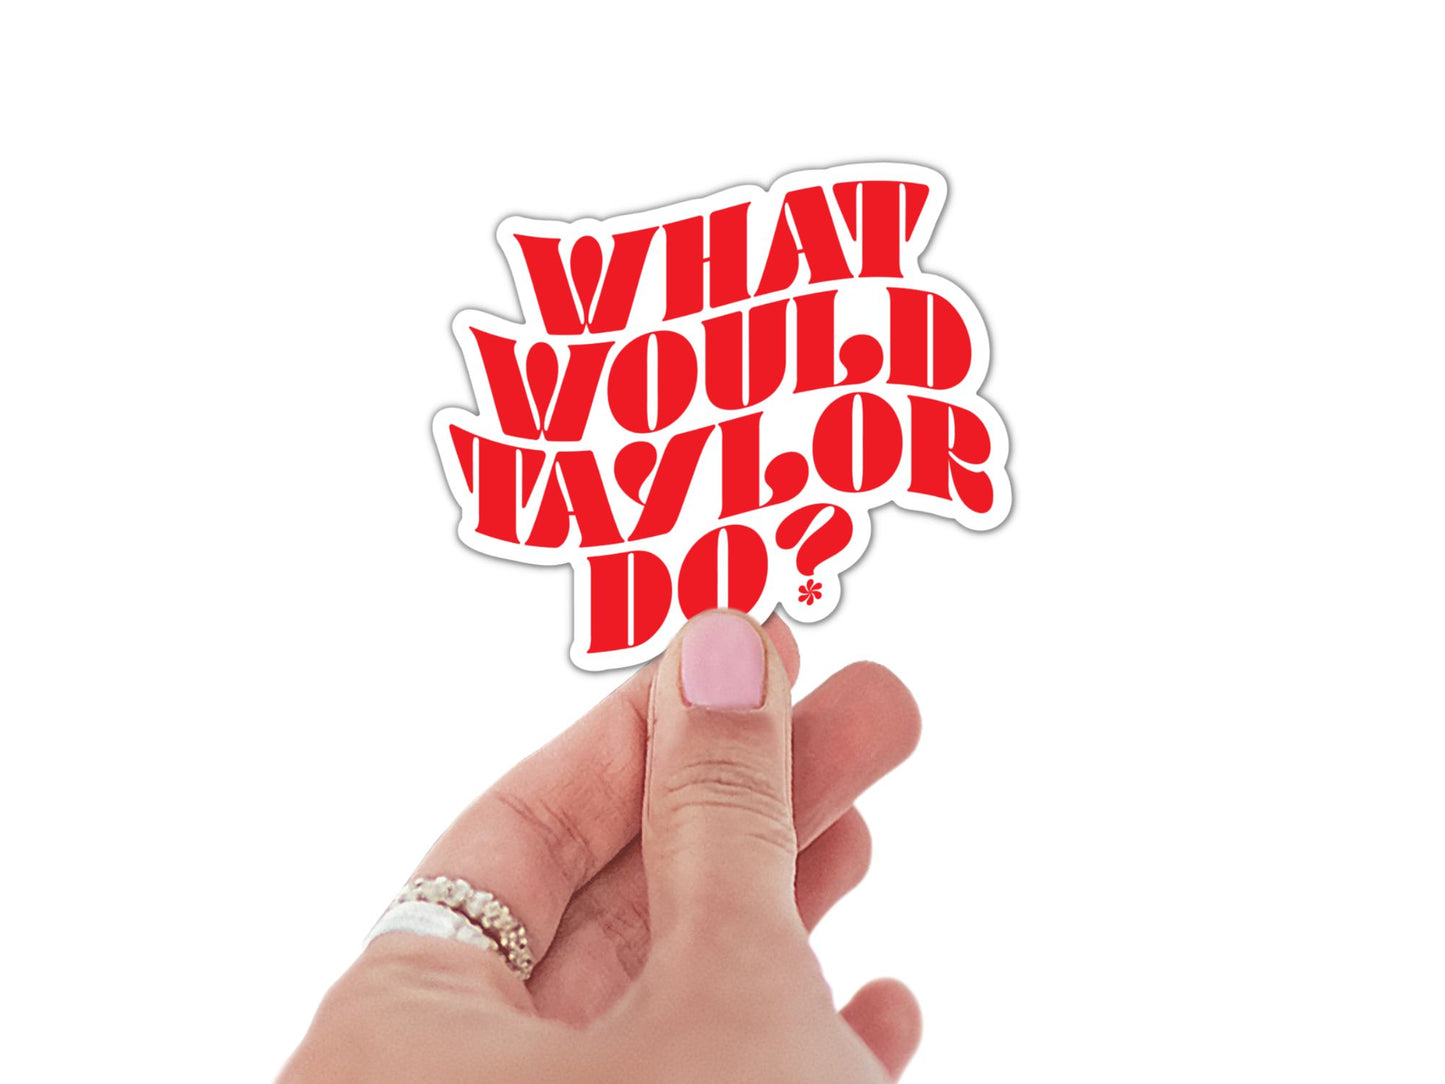 What Would Taylor Do? Sticker-Decorative Stickers > Arts & Entertainment > Hobbies & Creative Arts > Arts & Crafts > Art & Crafting Materials > Embellishments & Trims > Decorative Stickers-Quinn's Mercantile